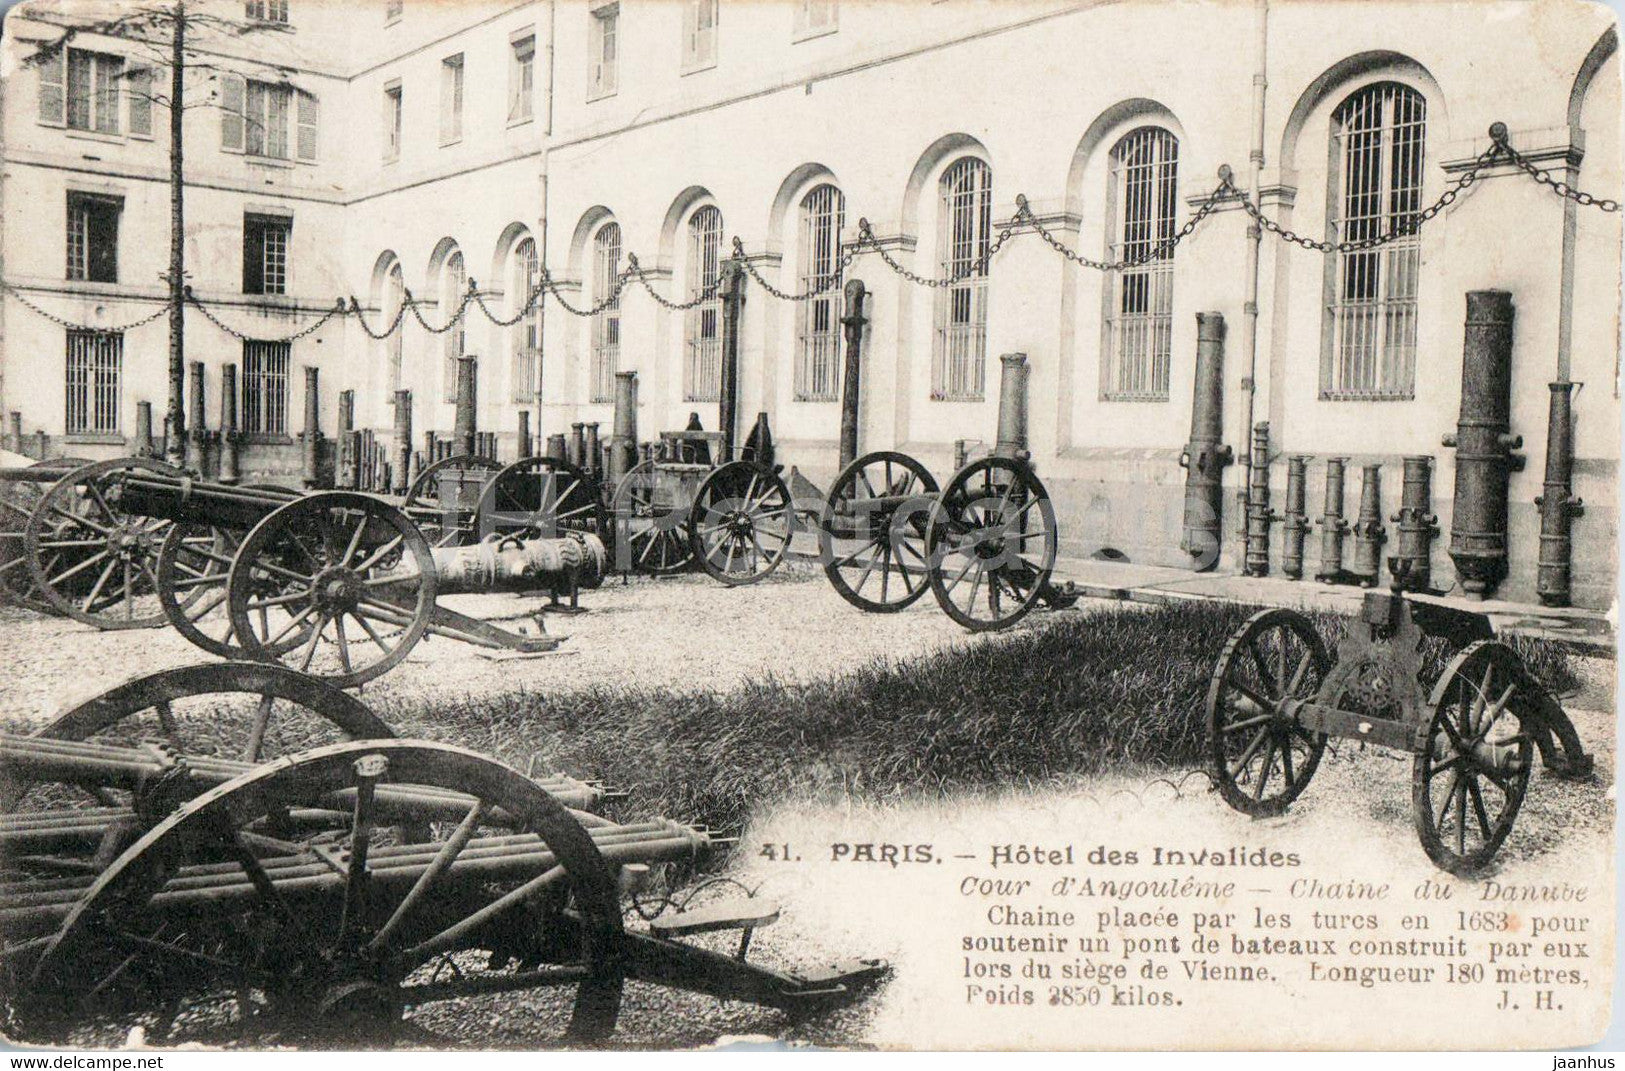 Paris - Hotel des Invalides - cannon - military - 41 - old postcard - 1904 - France - used - JH Postcards